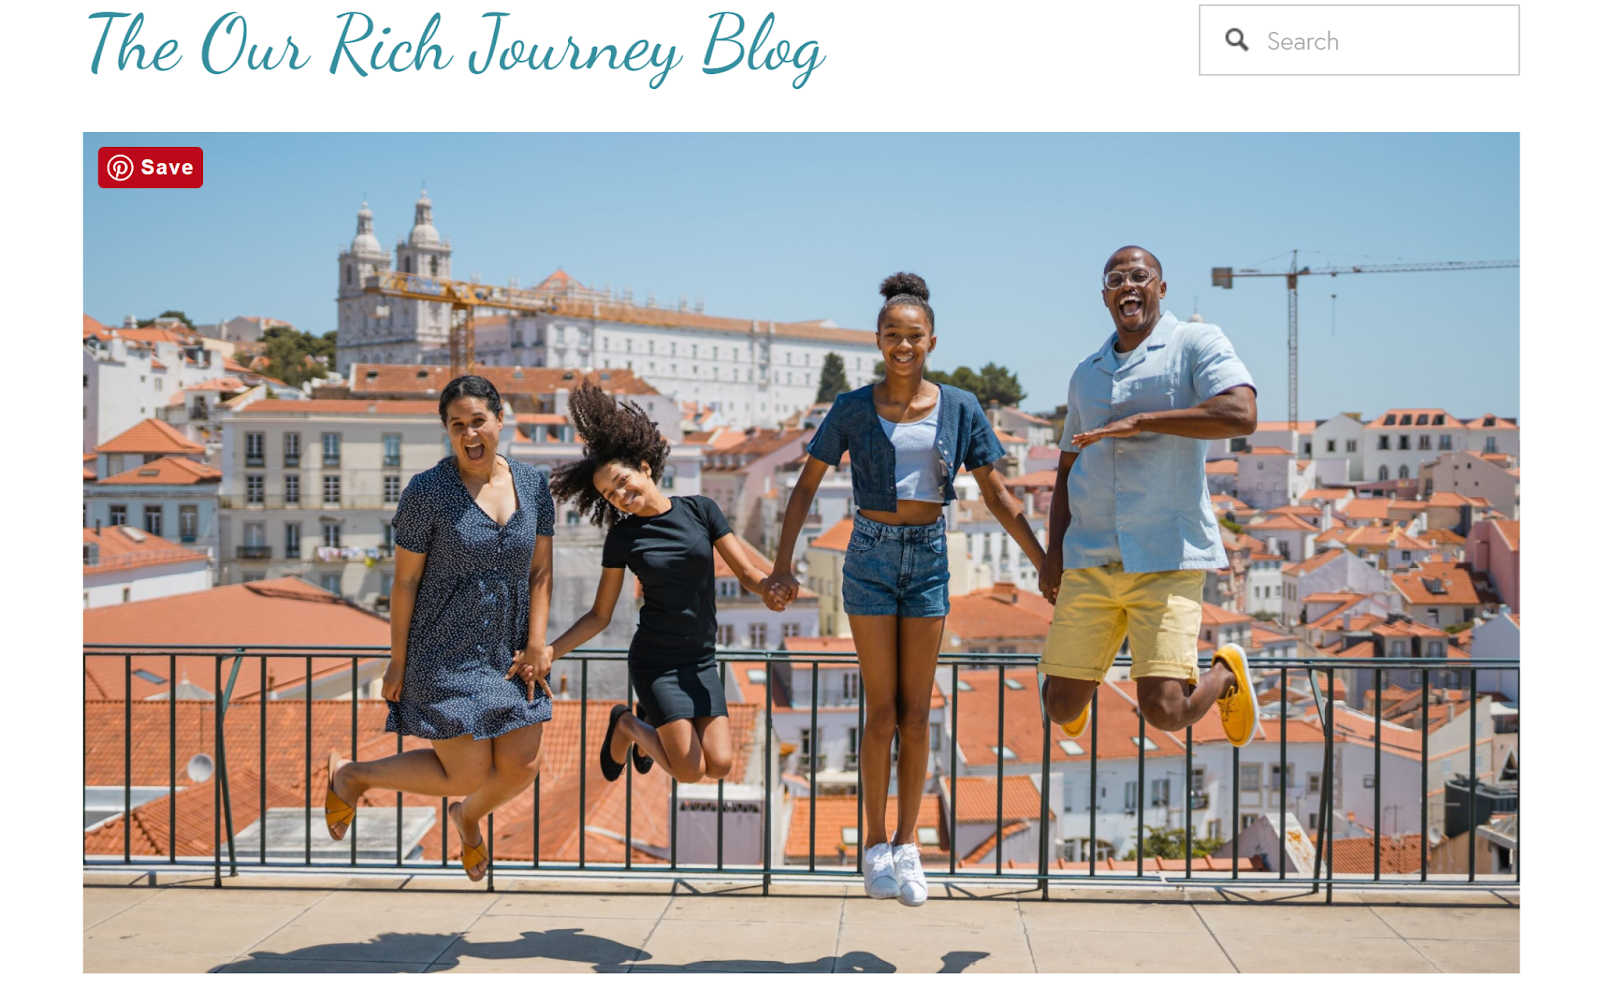 Our Rich Journey blog